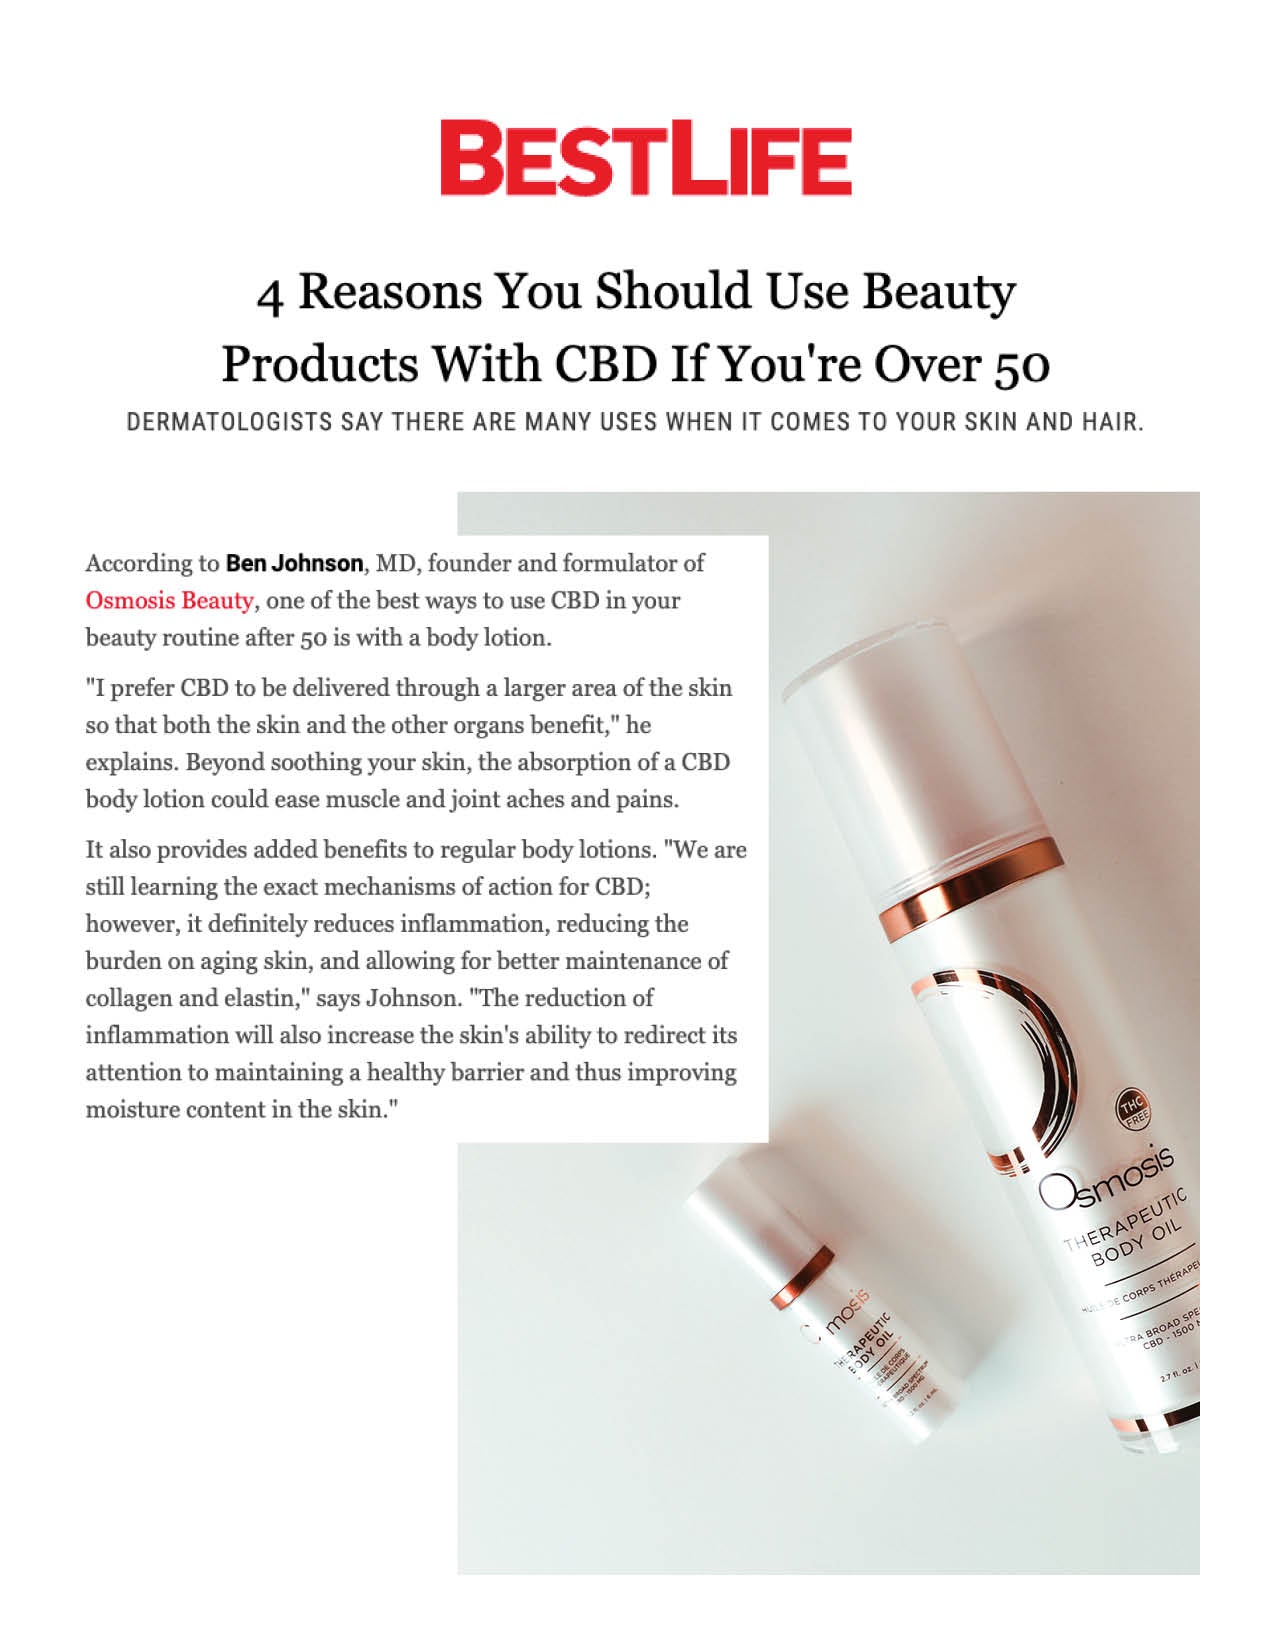 Dr Ben Johnson was interviewed for a story on BestLife.com titled 4 Reasons You Should Use Beauty Products With CBD If You're Over 50